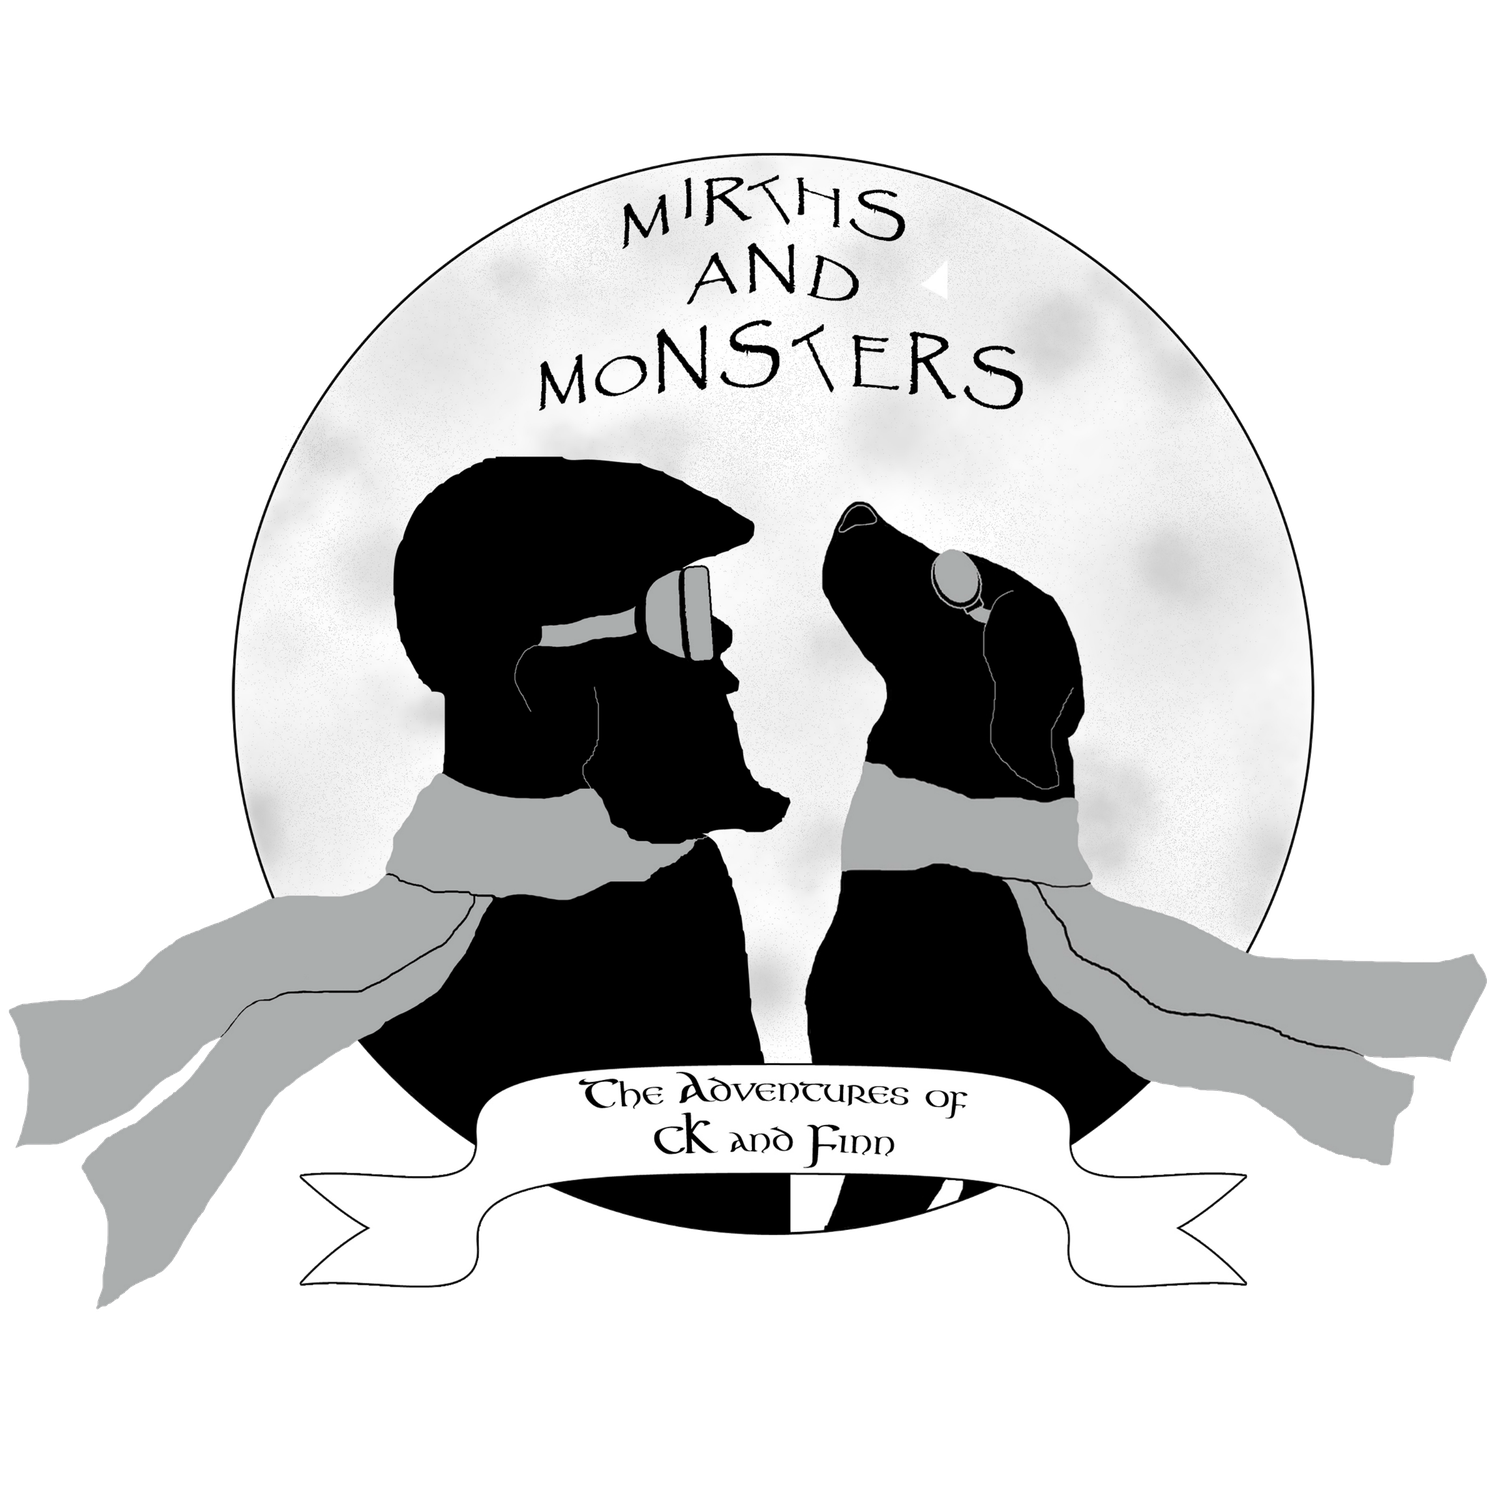 Mirths and Monsters